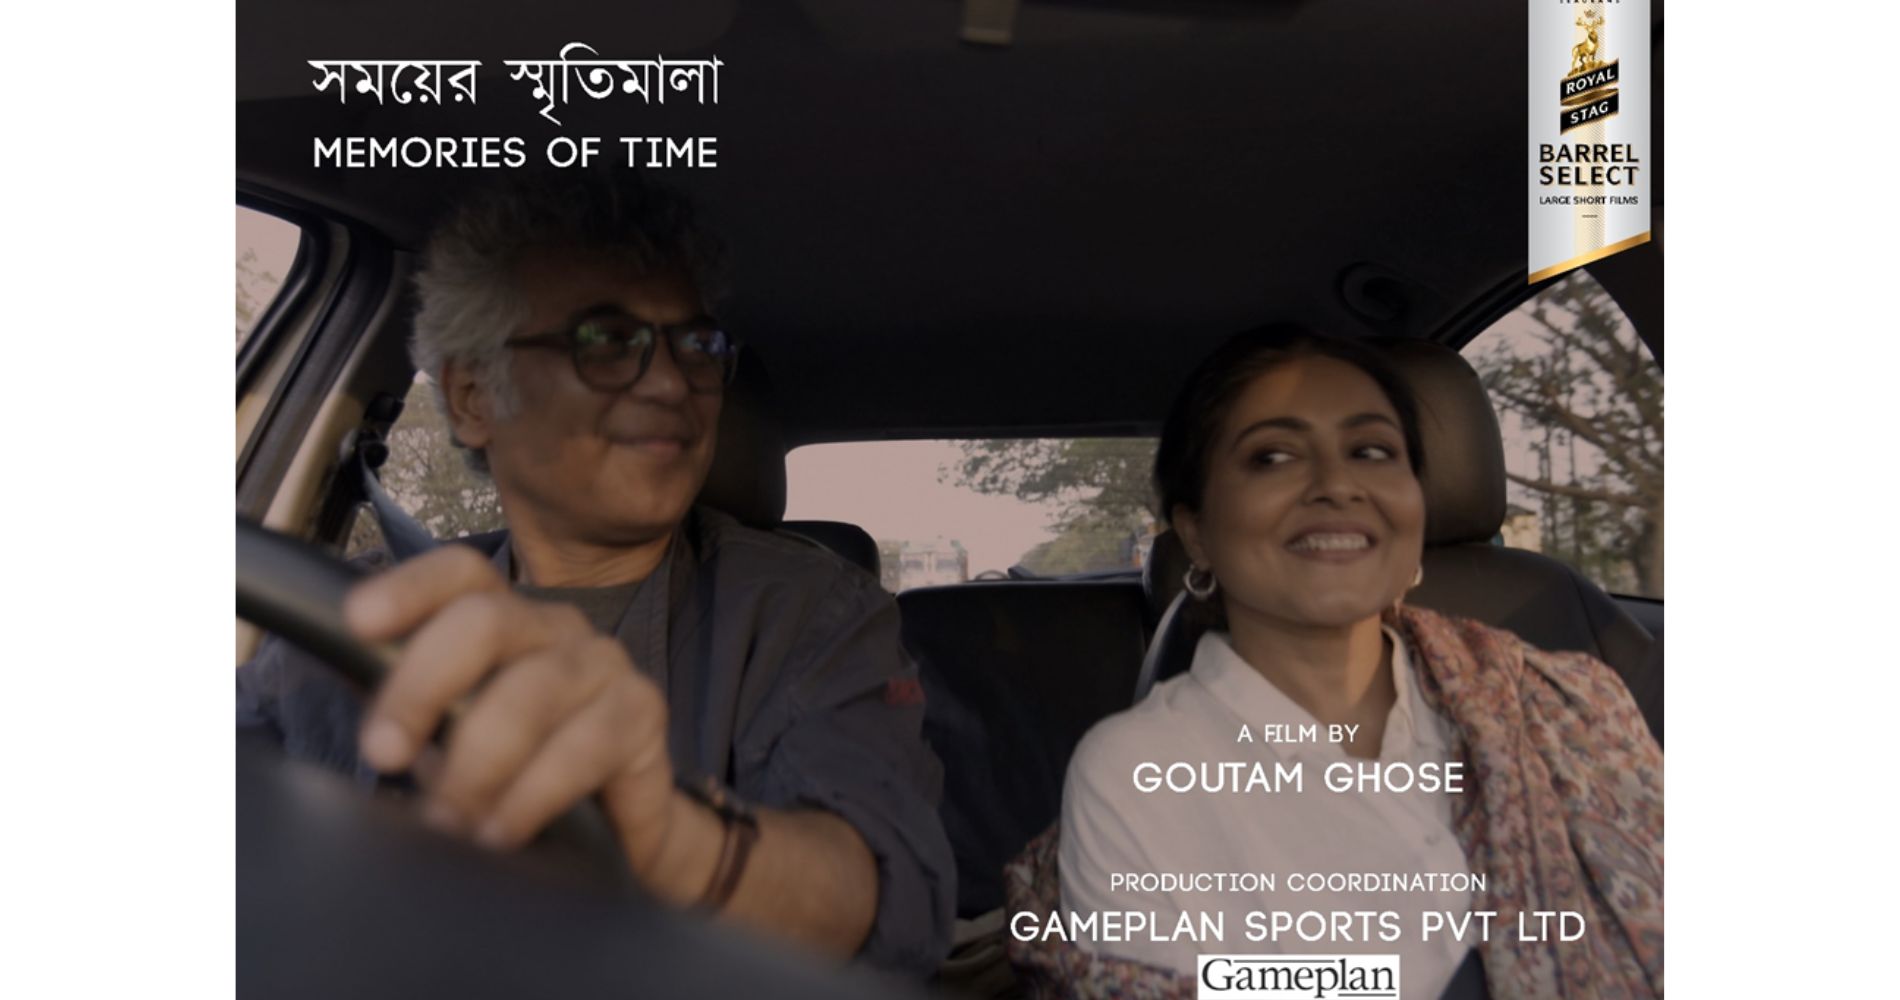 New Short Film 'Somoyer Smritimala' By Royal Stag Captures The Essence Of Pandemic-Induced Uncertainty